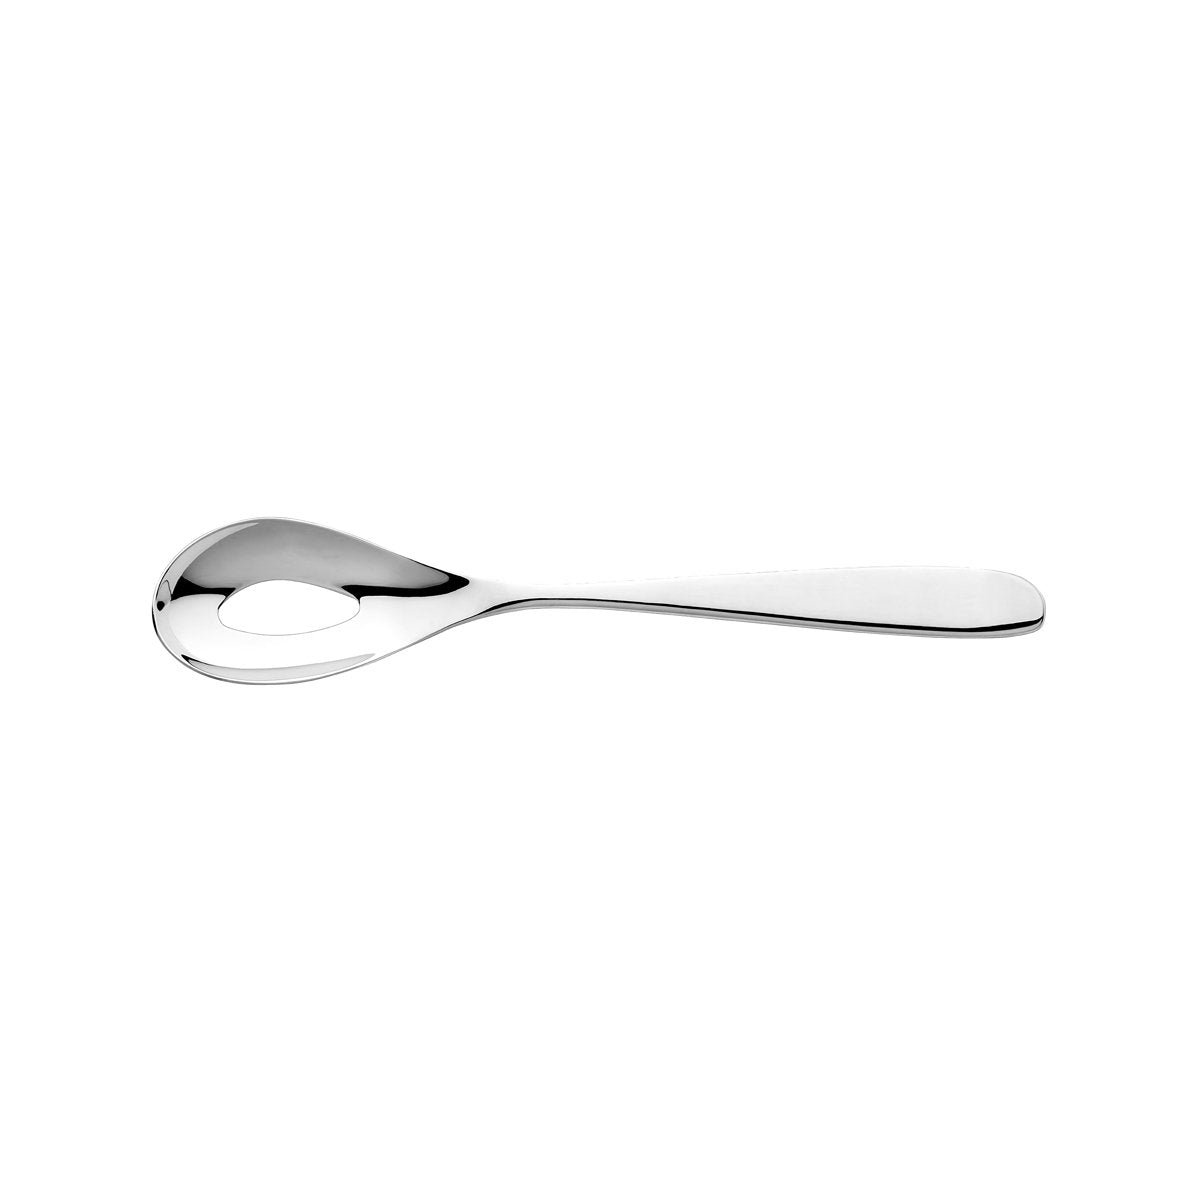 SWW-OLM12 Studio William Olive Mirror Serving Spoon With Hole Tomkin Australia Hospitality Supplies